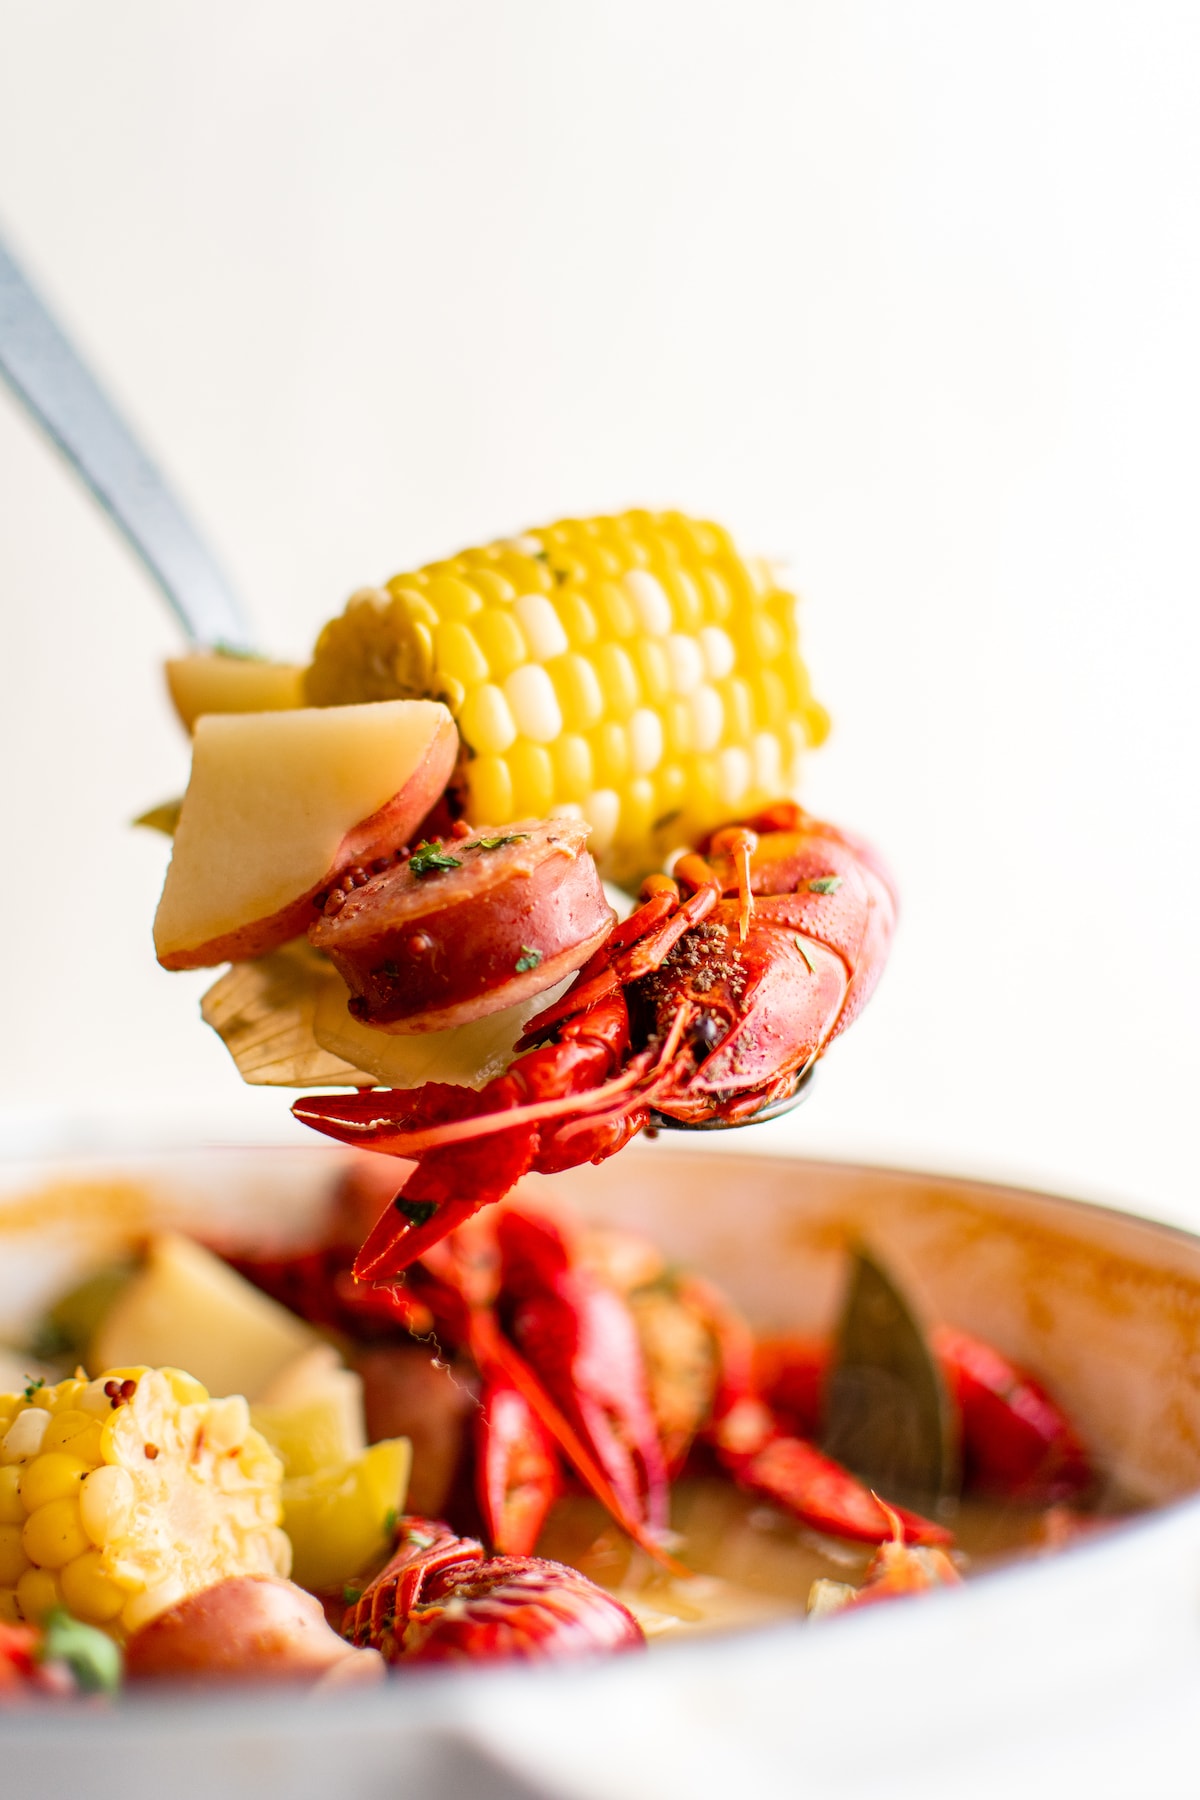 A ladle scooping up a serving of crawfish boil out of a large white pot.